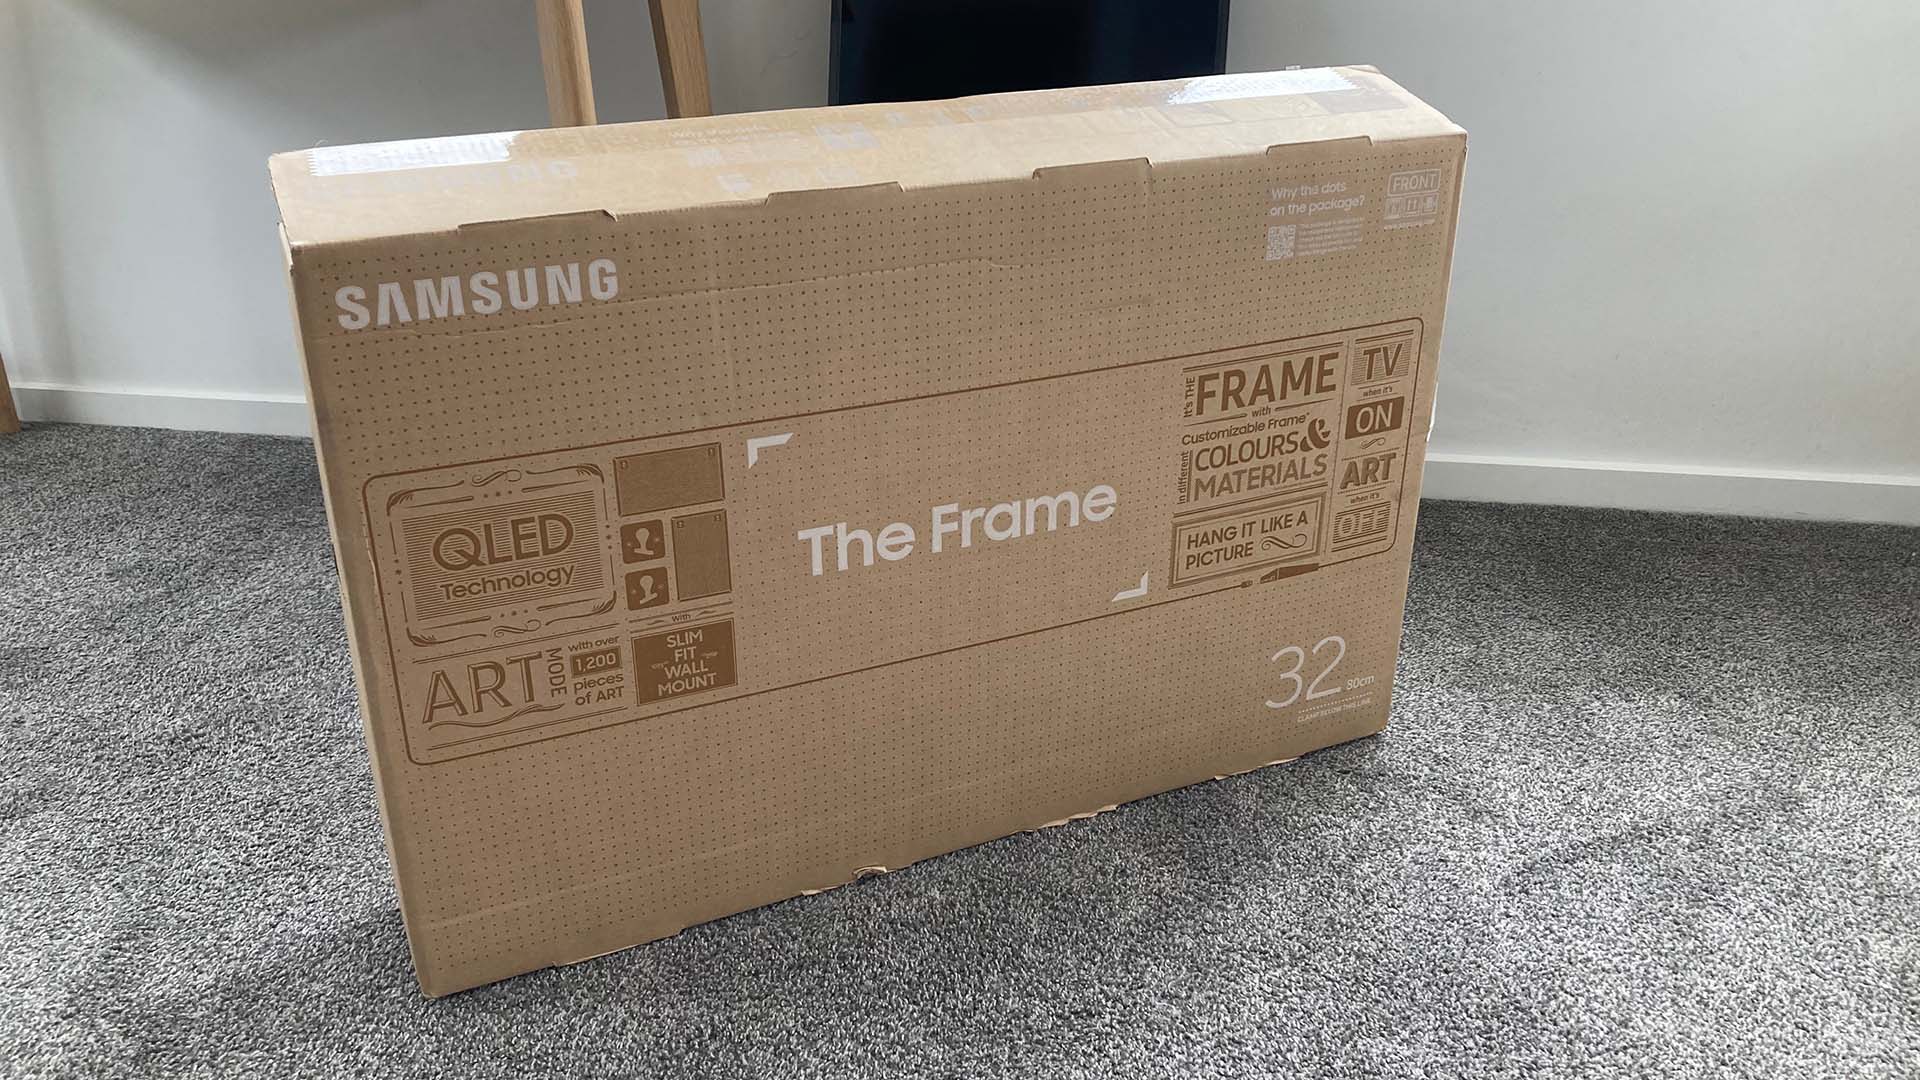 The Frame TV Unboxing